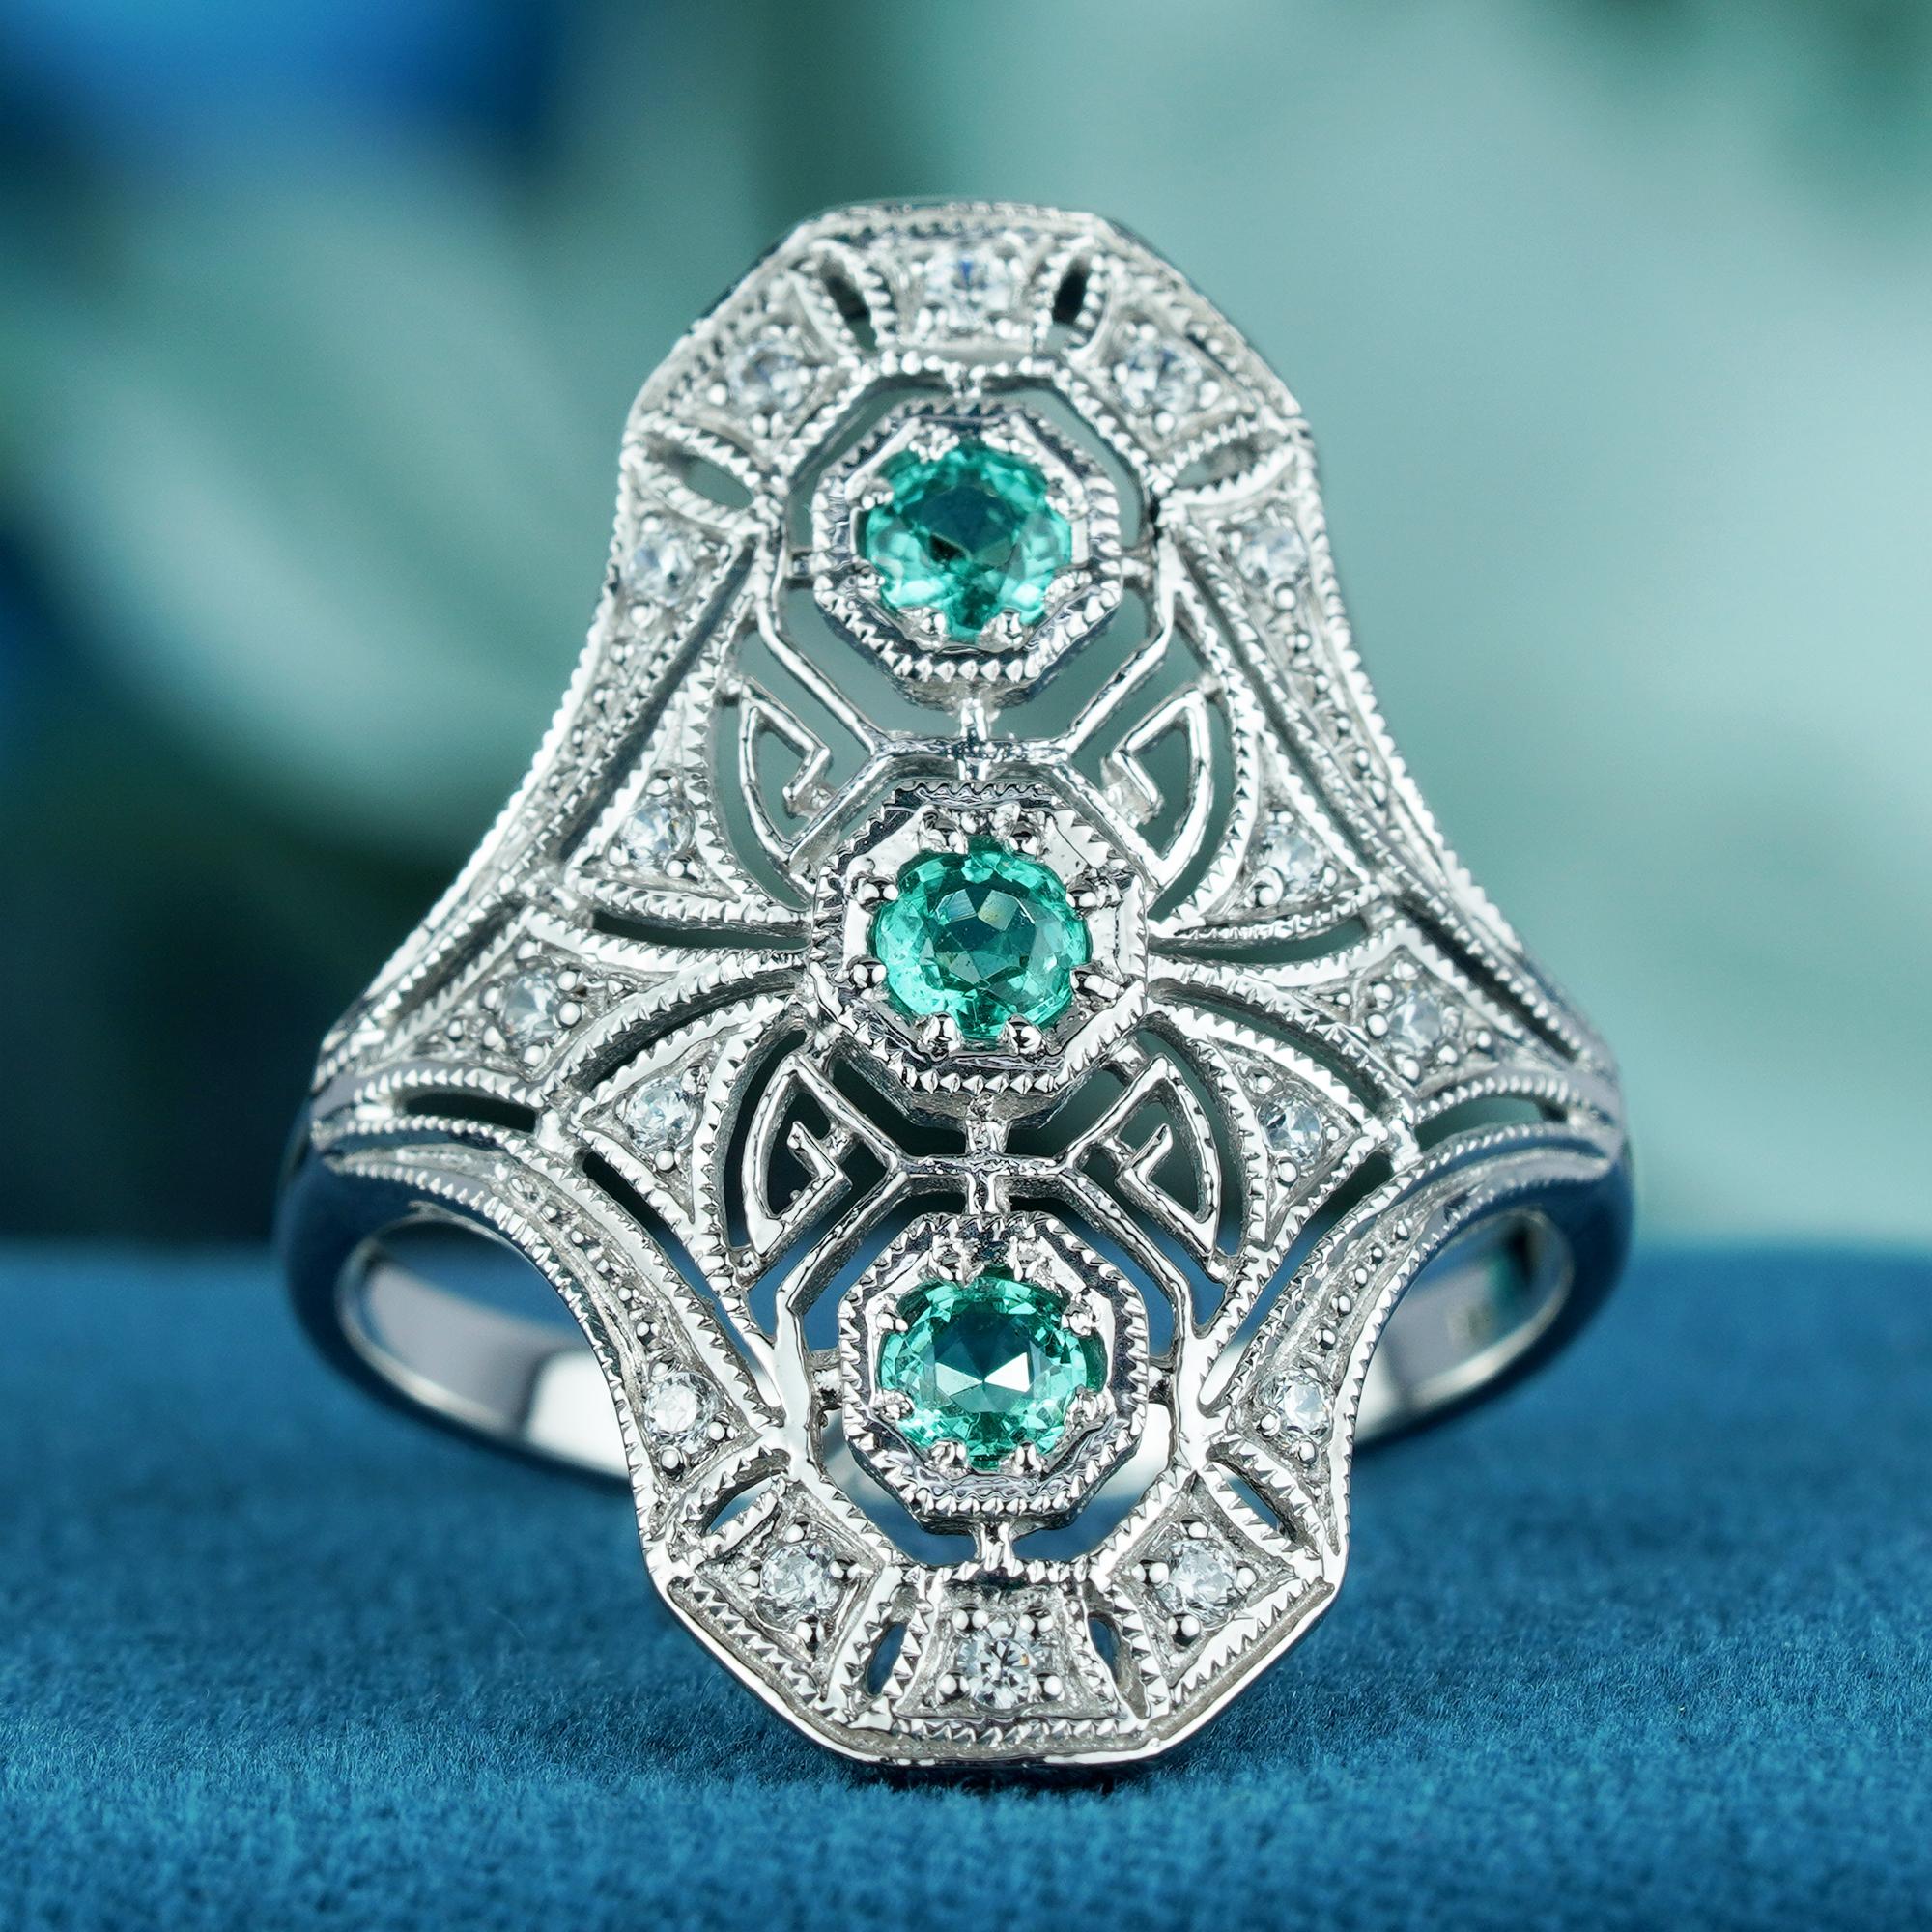 For Sale:  Natural Emerald Diamond Art Deco Style Dinner Ring in Solid 9K White Gold 2